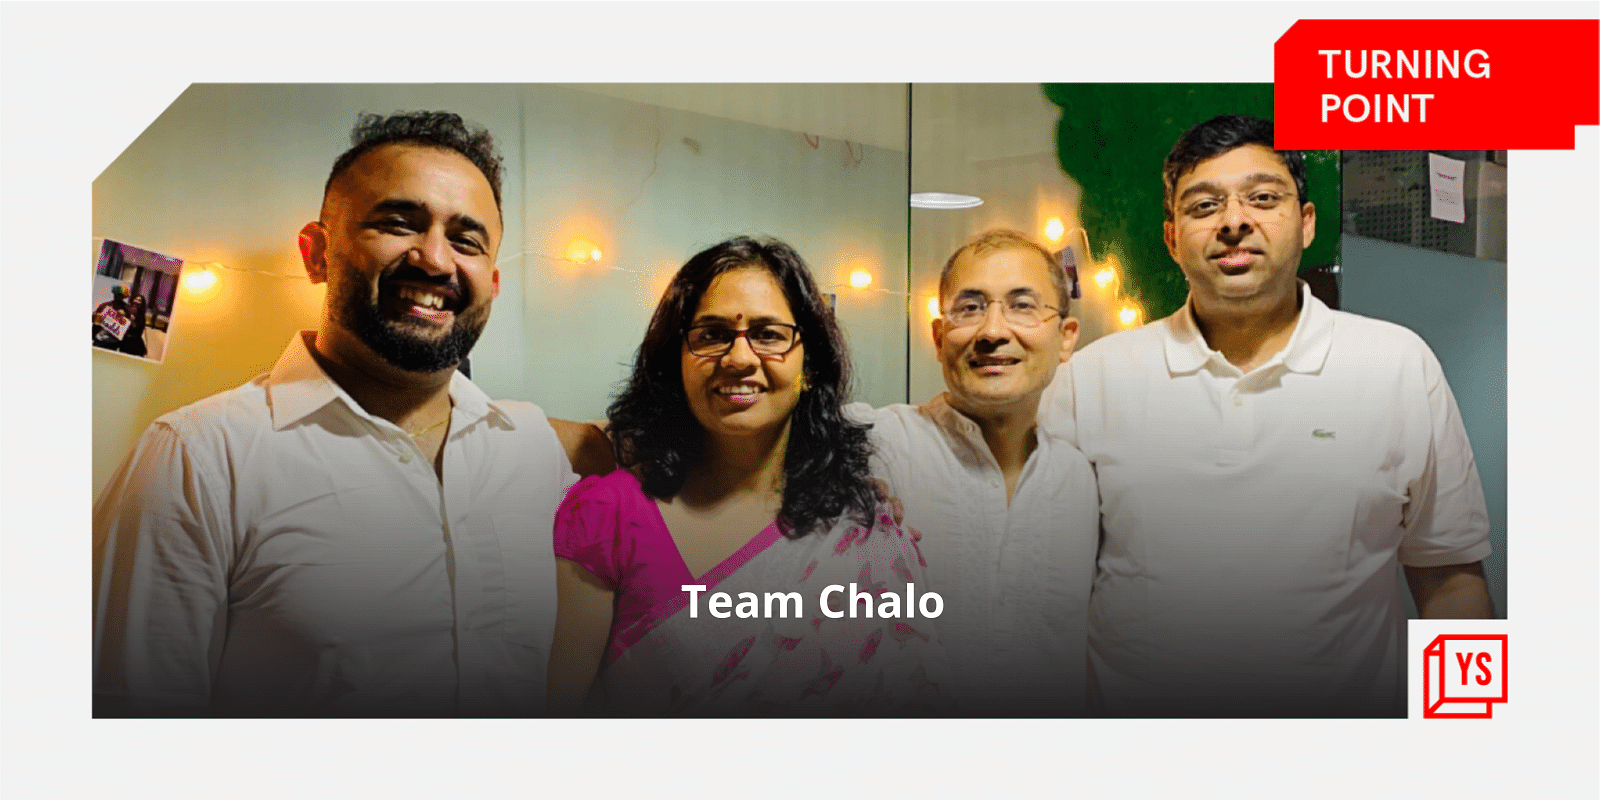 You are currently viewing [The Turning Point] What made these entrepreneurs embark on the ‘Chalo’ journey